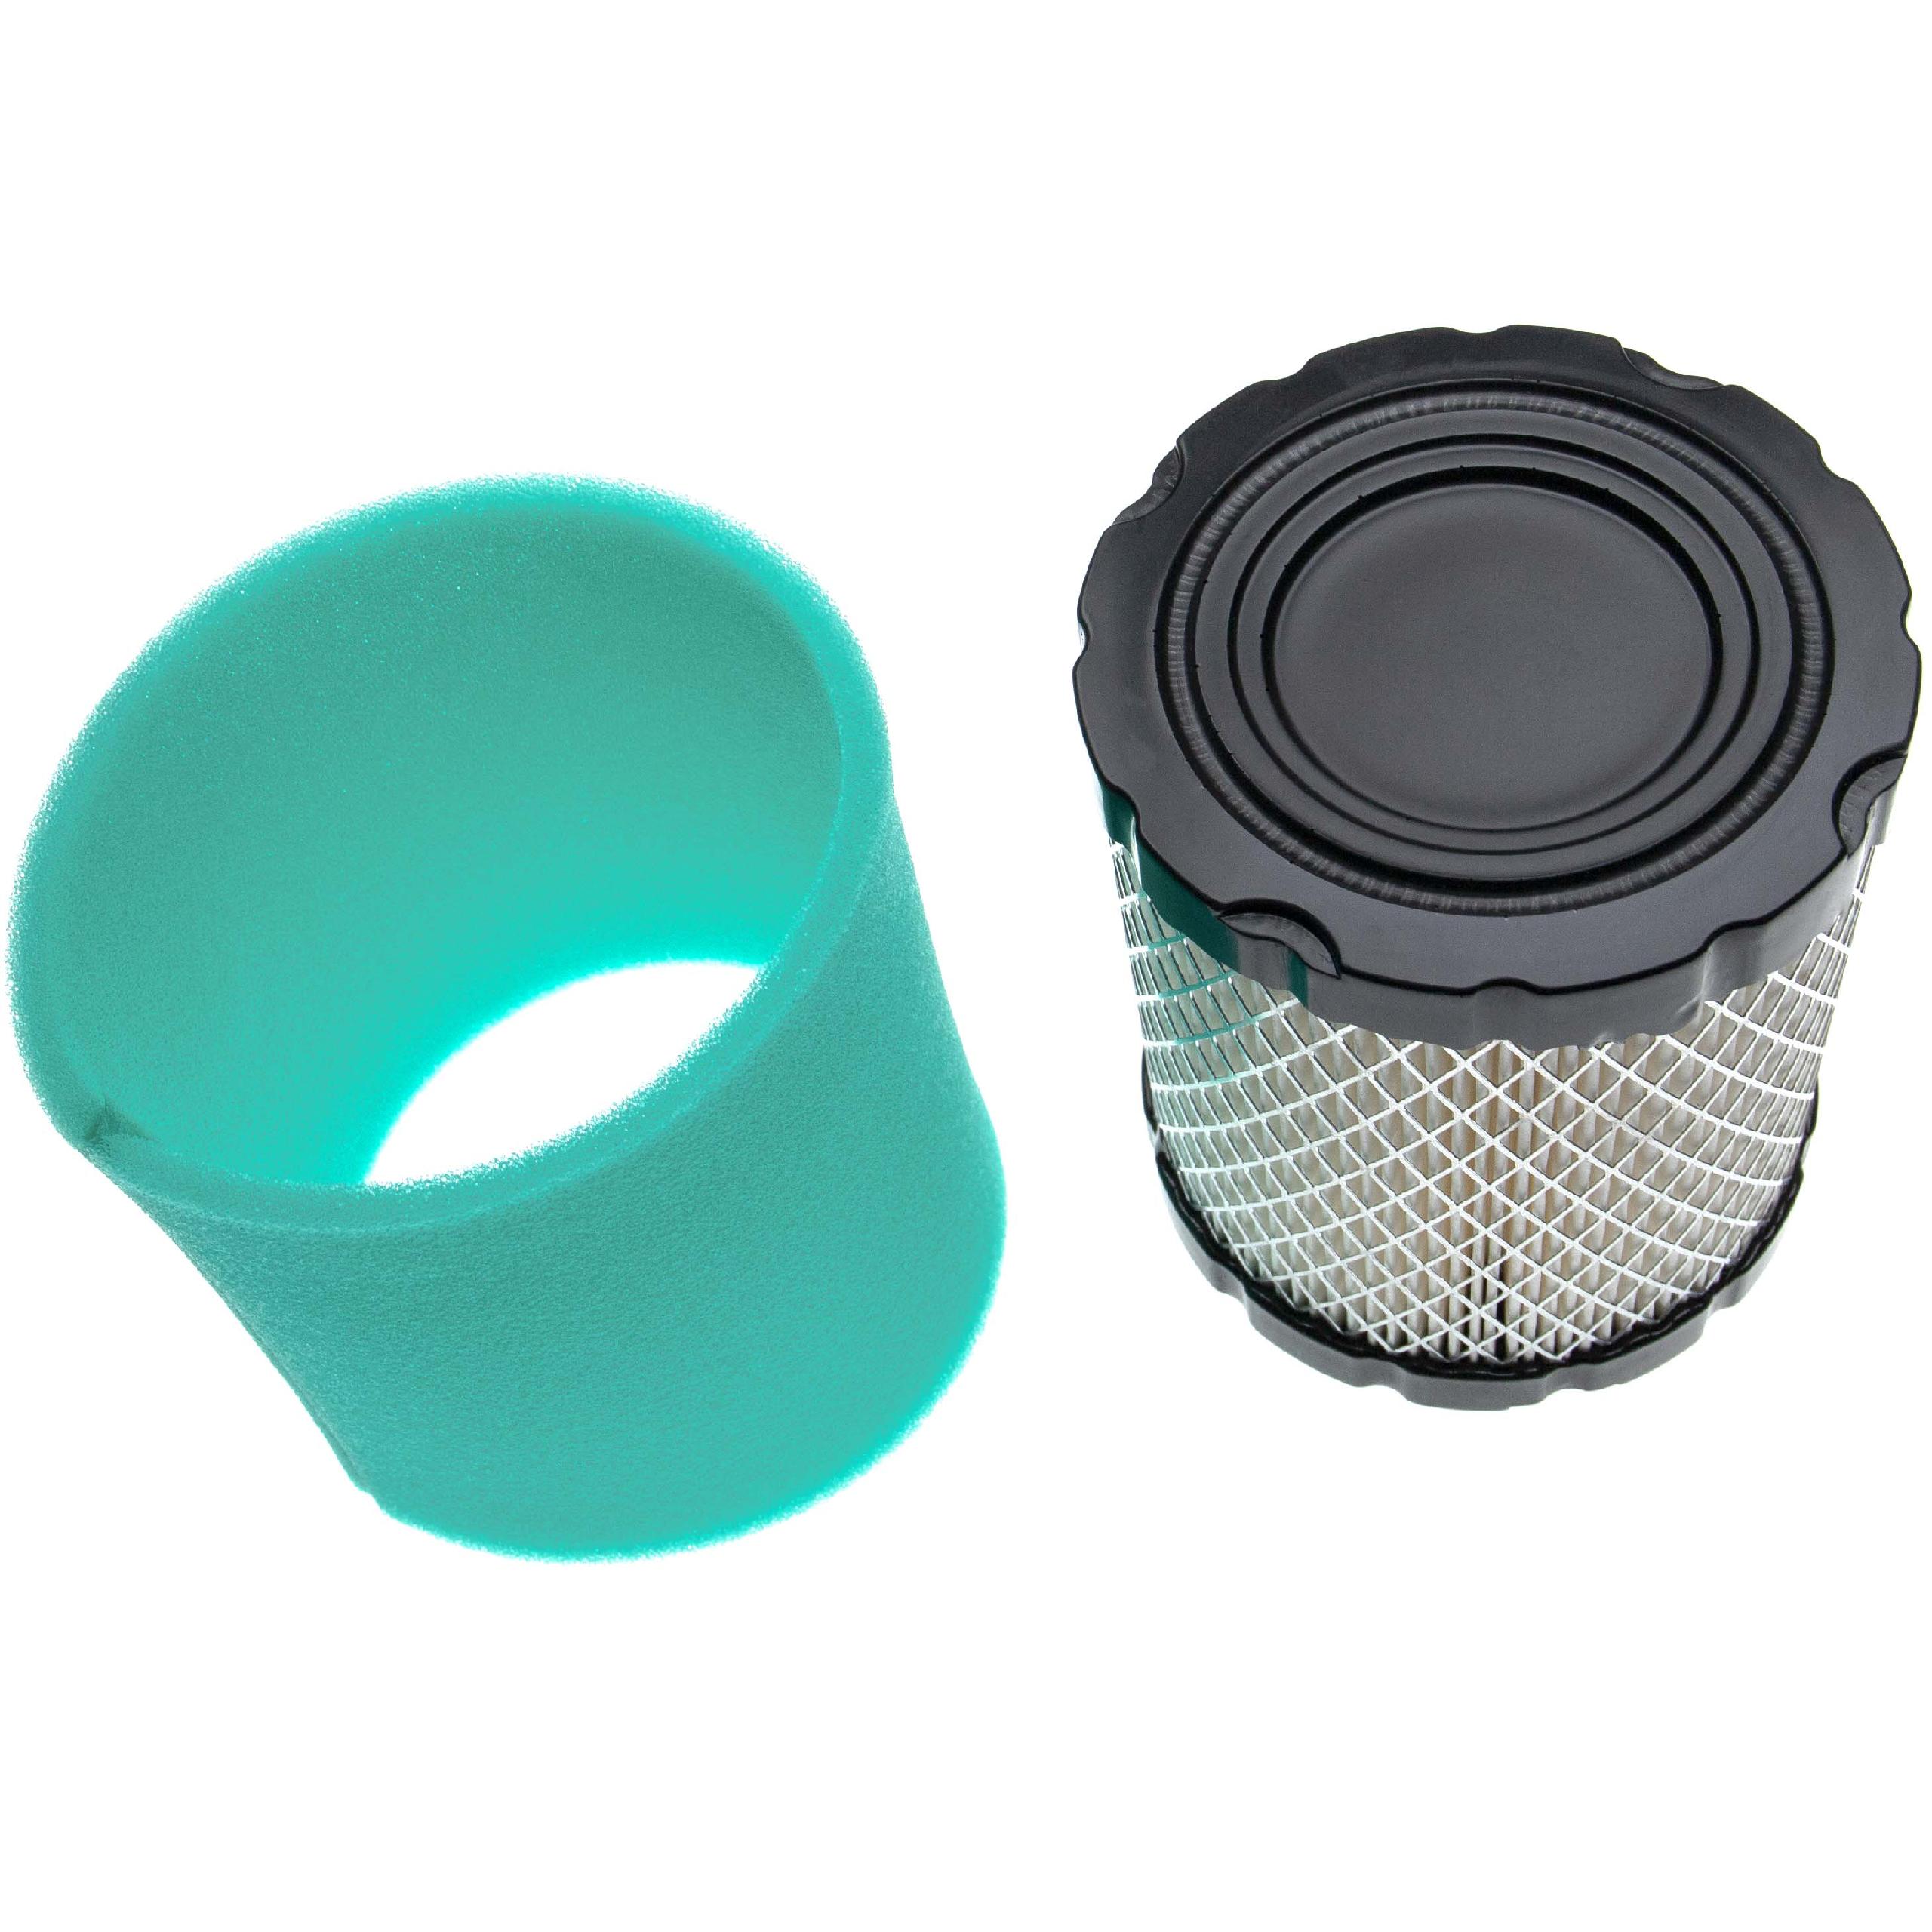 Filter Set as Spare for Briggs & Stratton 593217 for Lawn Tractor - 1x foam filter, 1x paper air filter